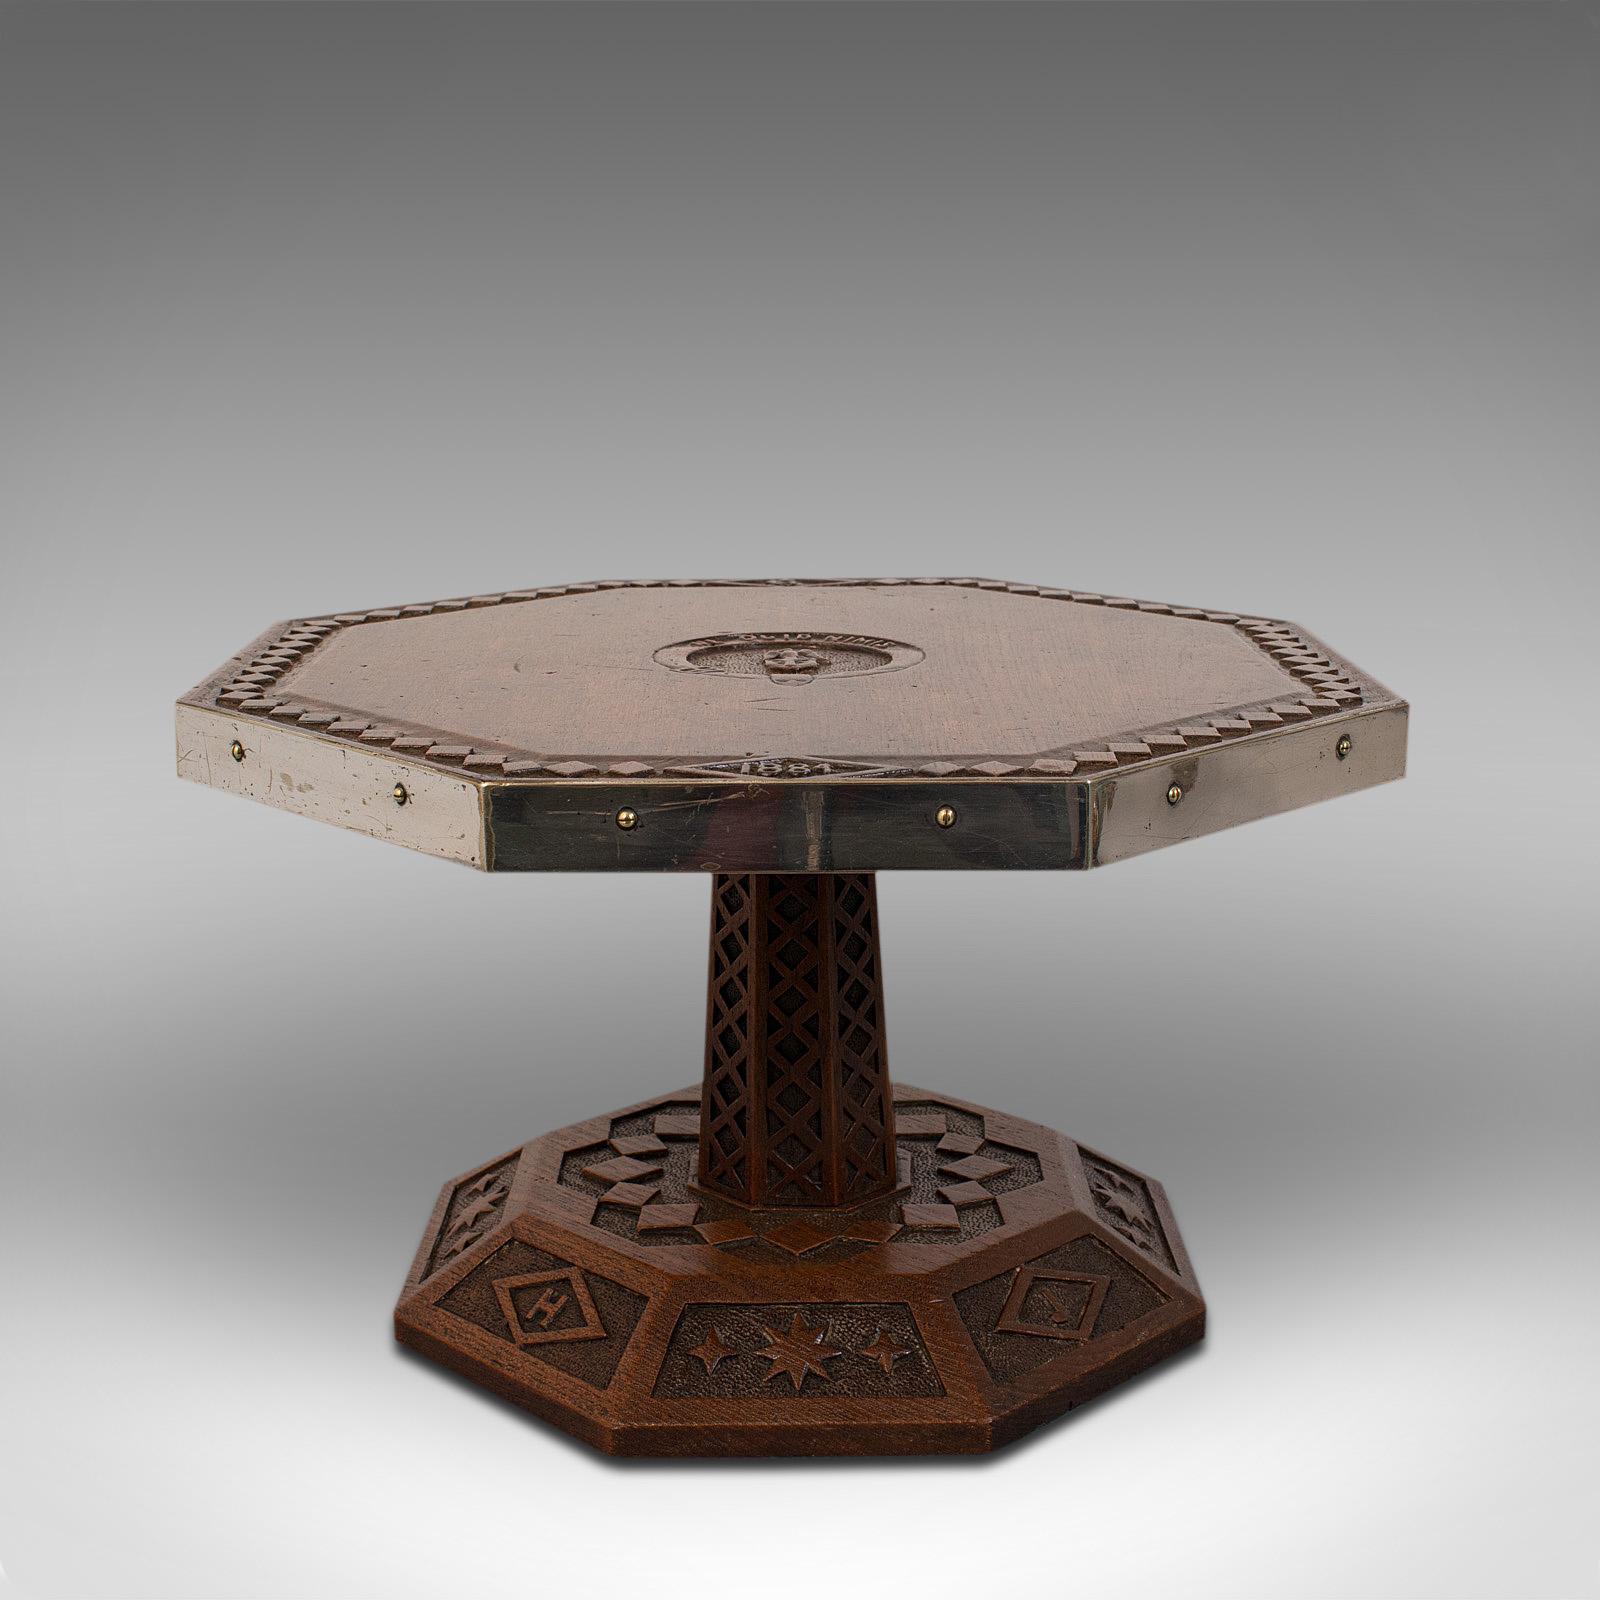 This is an antique revolving table-top platter. An English, oak octagonal Lazy Susan with ecclesiastical taste, dating to the Victorian period, circa 1884.

Prominent decorative serving platter with strong ecclesiastic or Masonic taste
Displaying